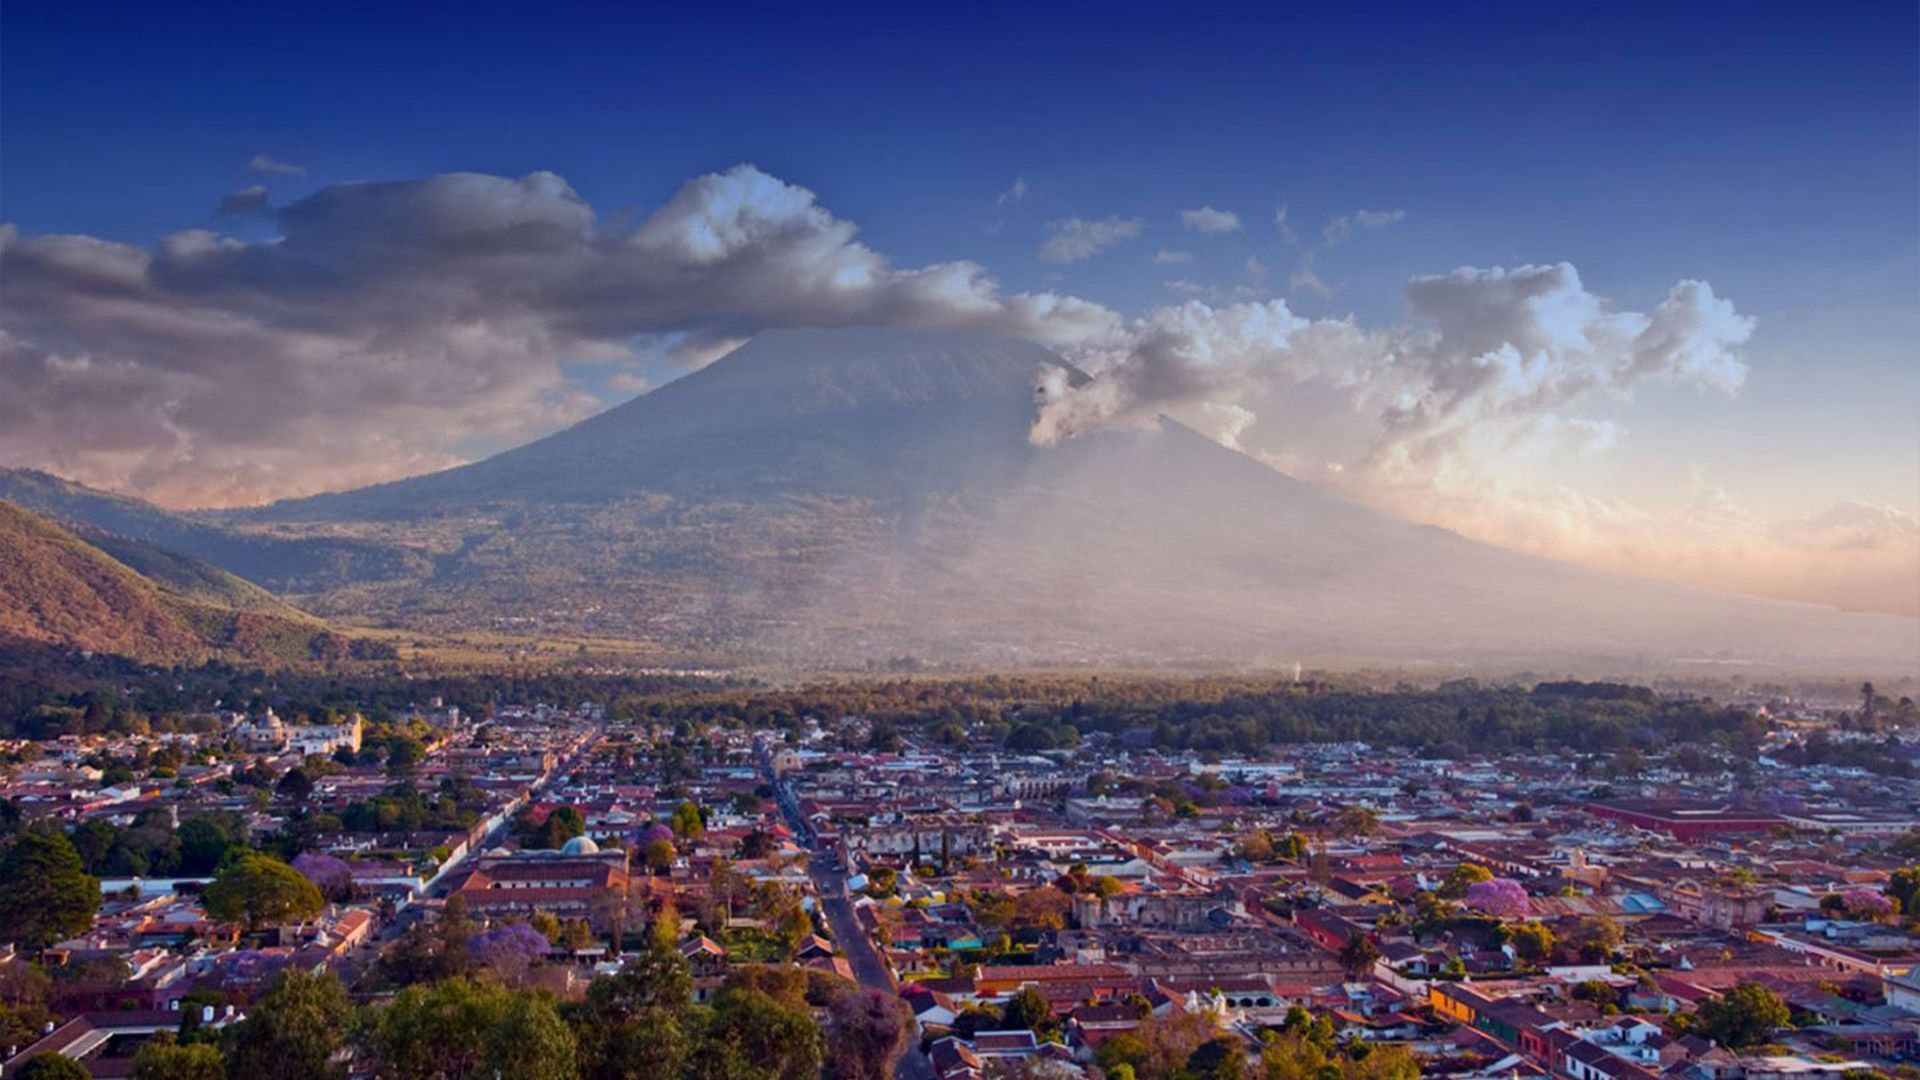 With PayPorter, you can make fast, easy and safe money transfers to Guatemala at the most affordable prices!